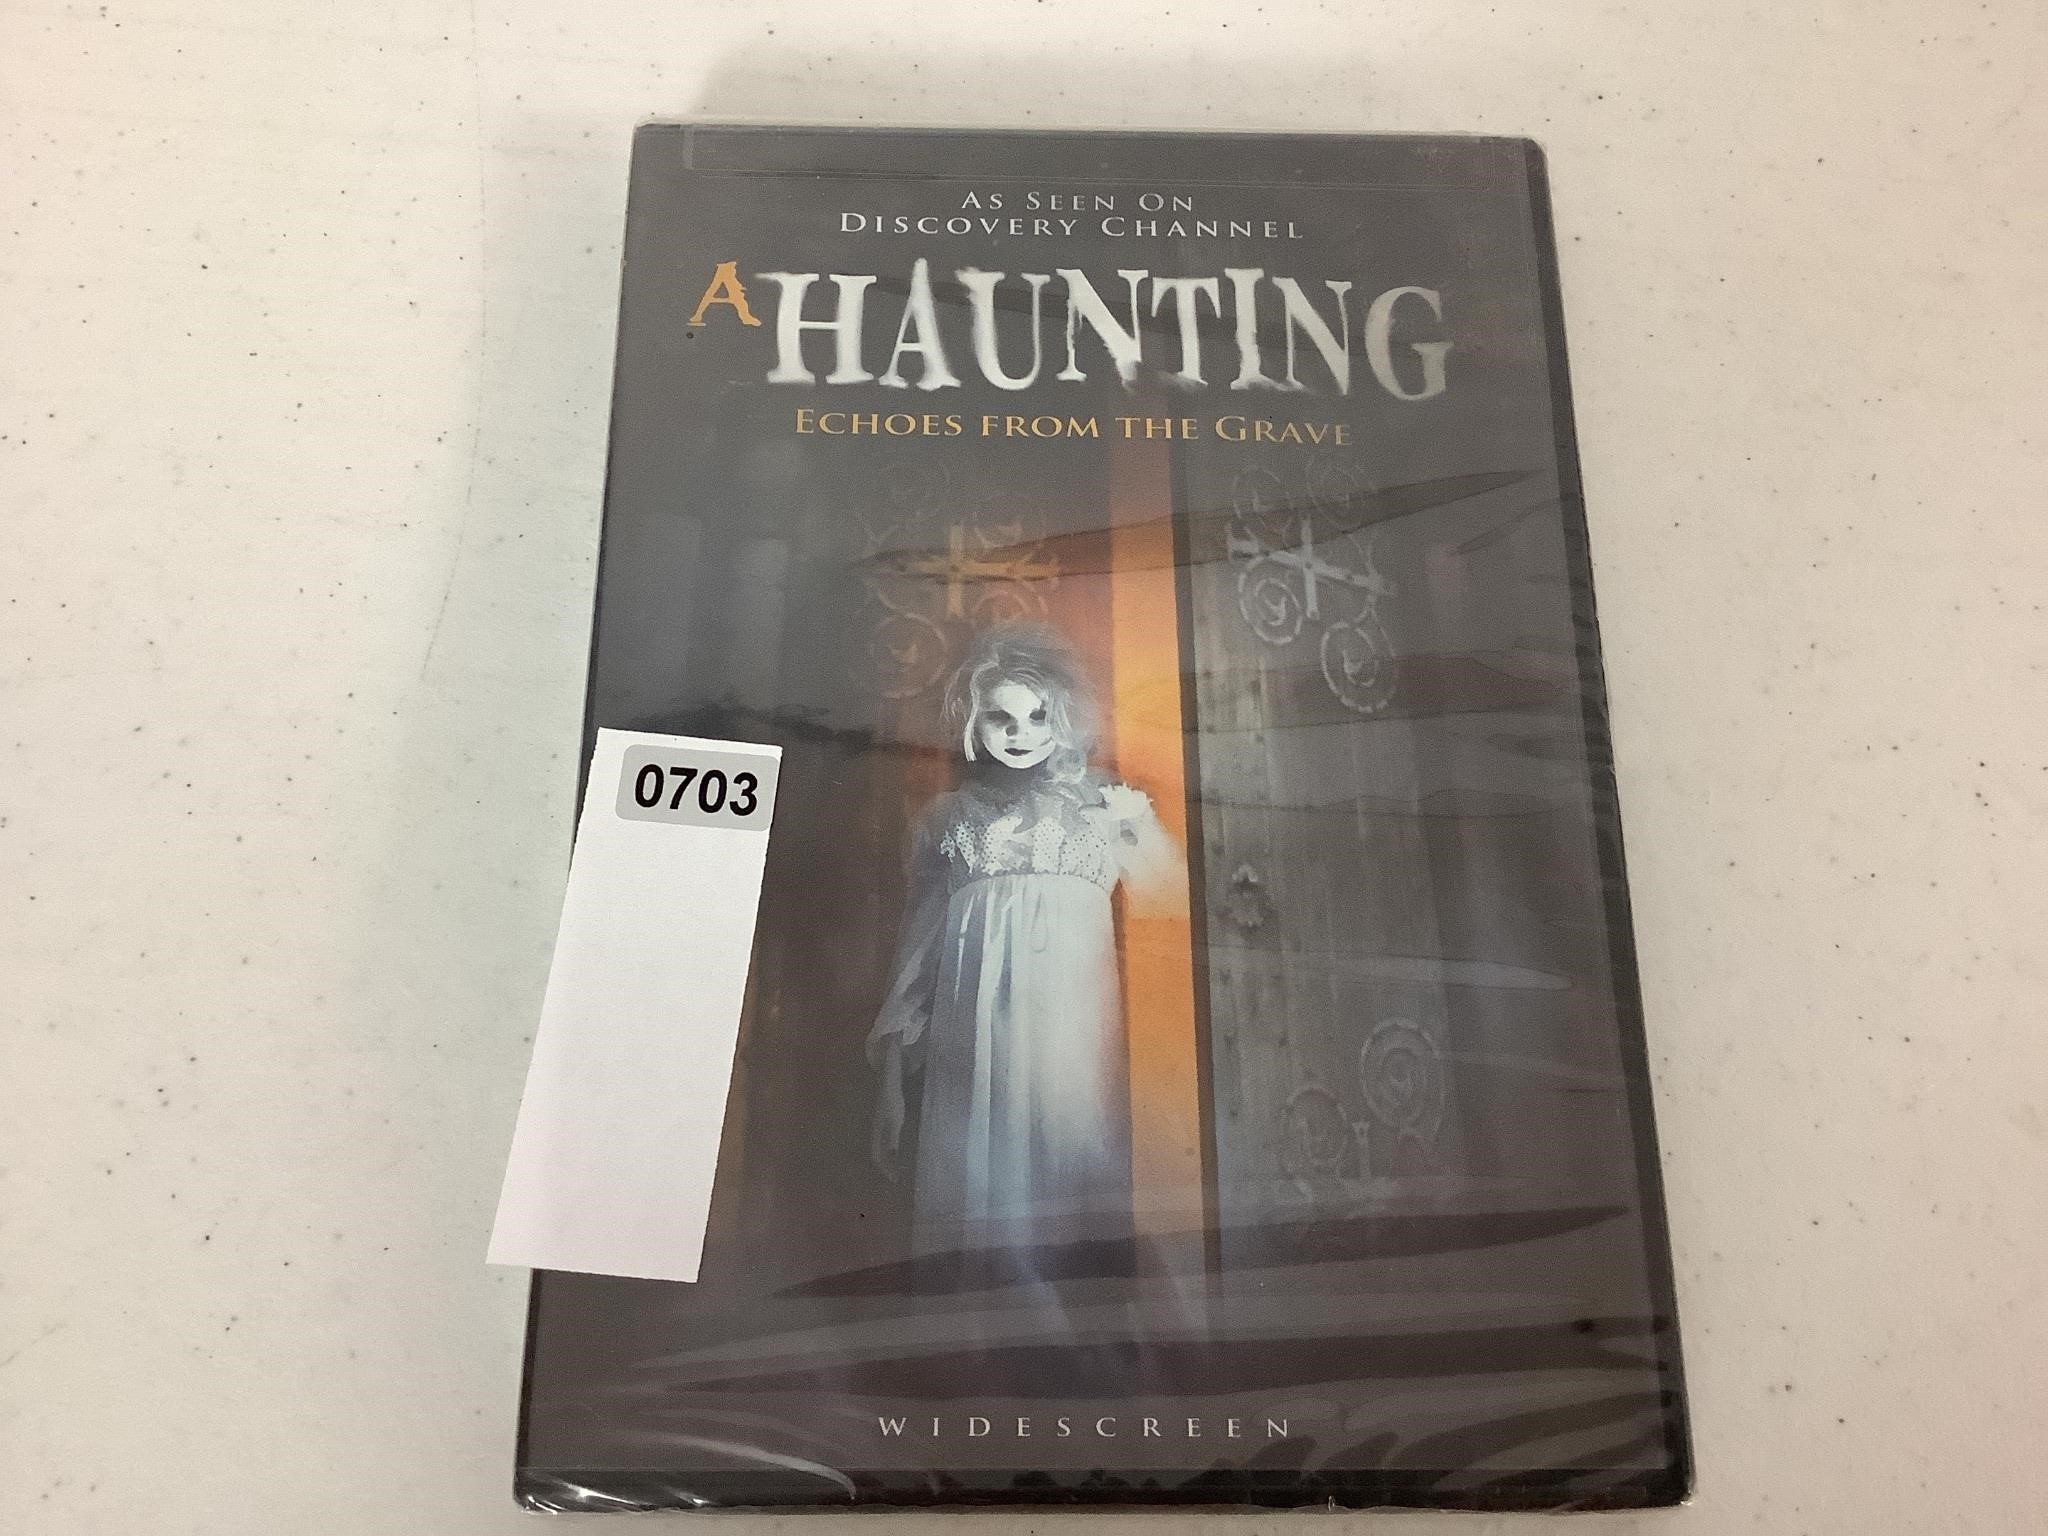 "A HAUNTING" DVD - SEALED IN PLASTIC